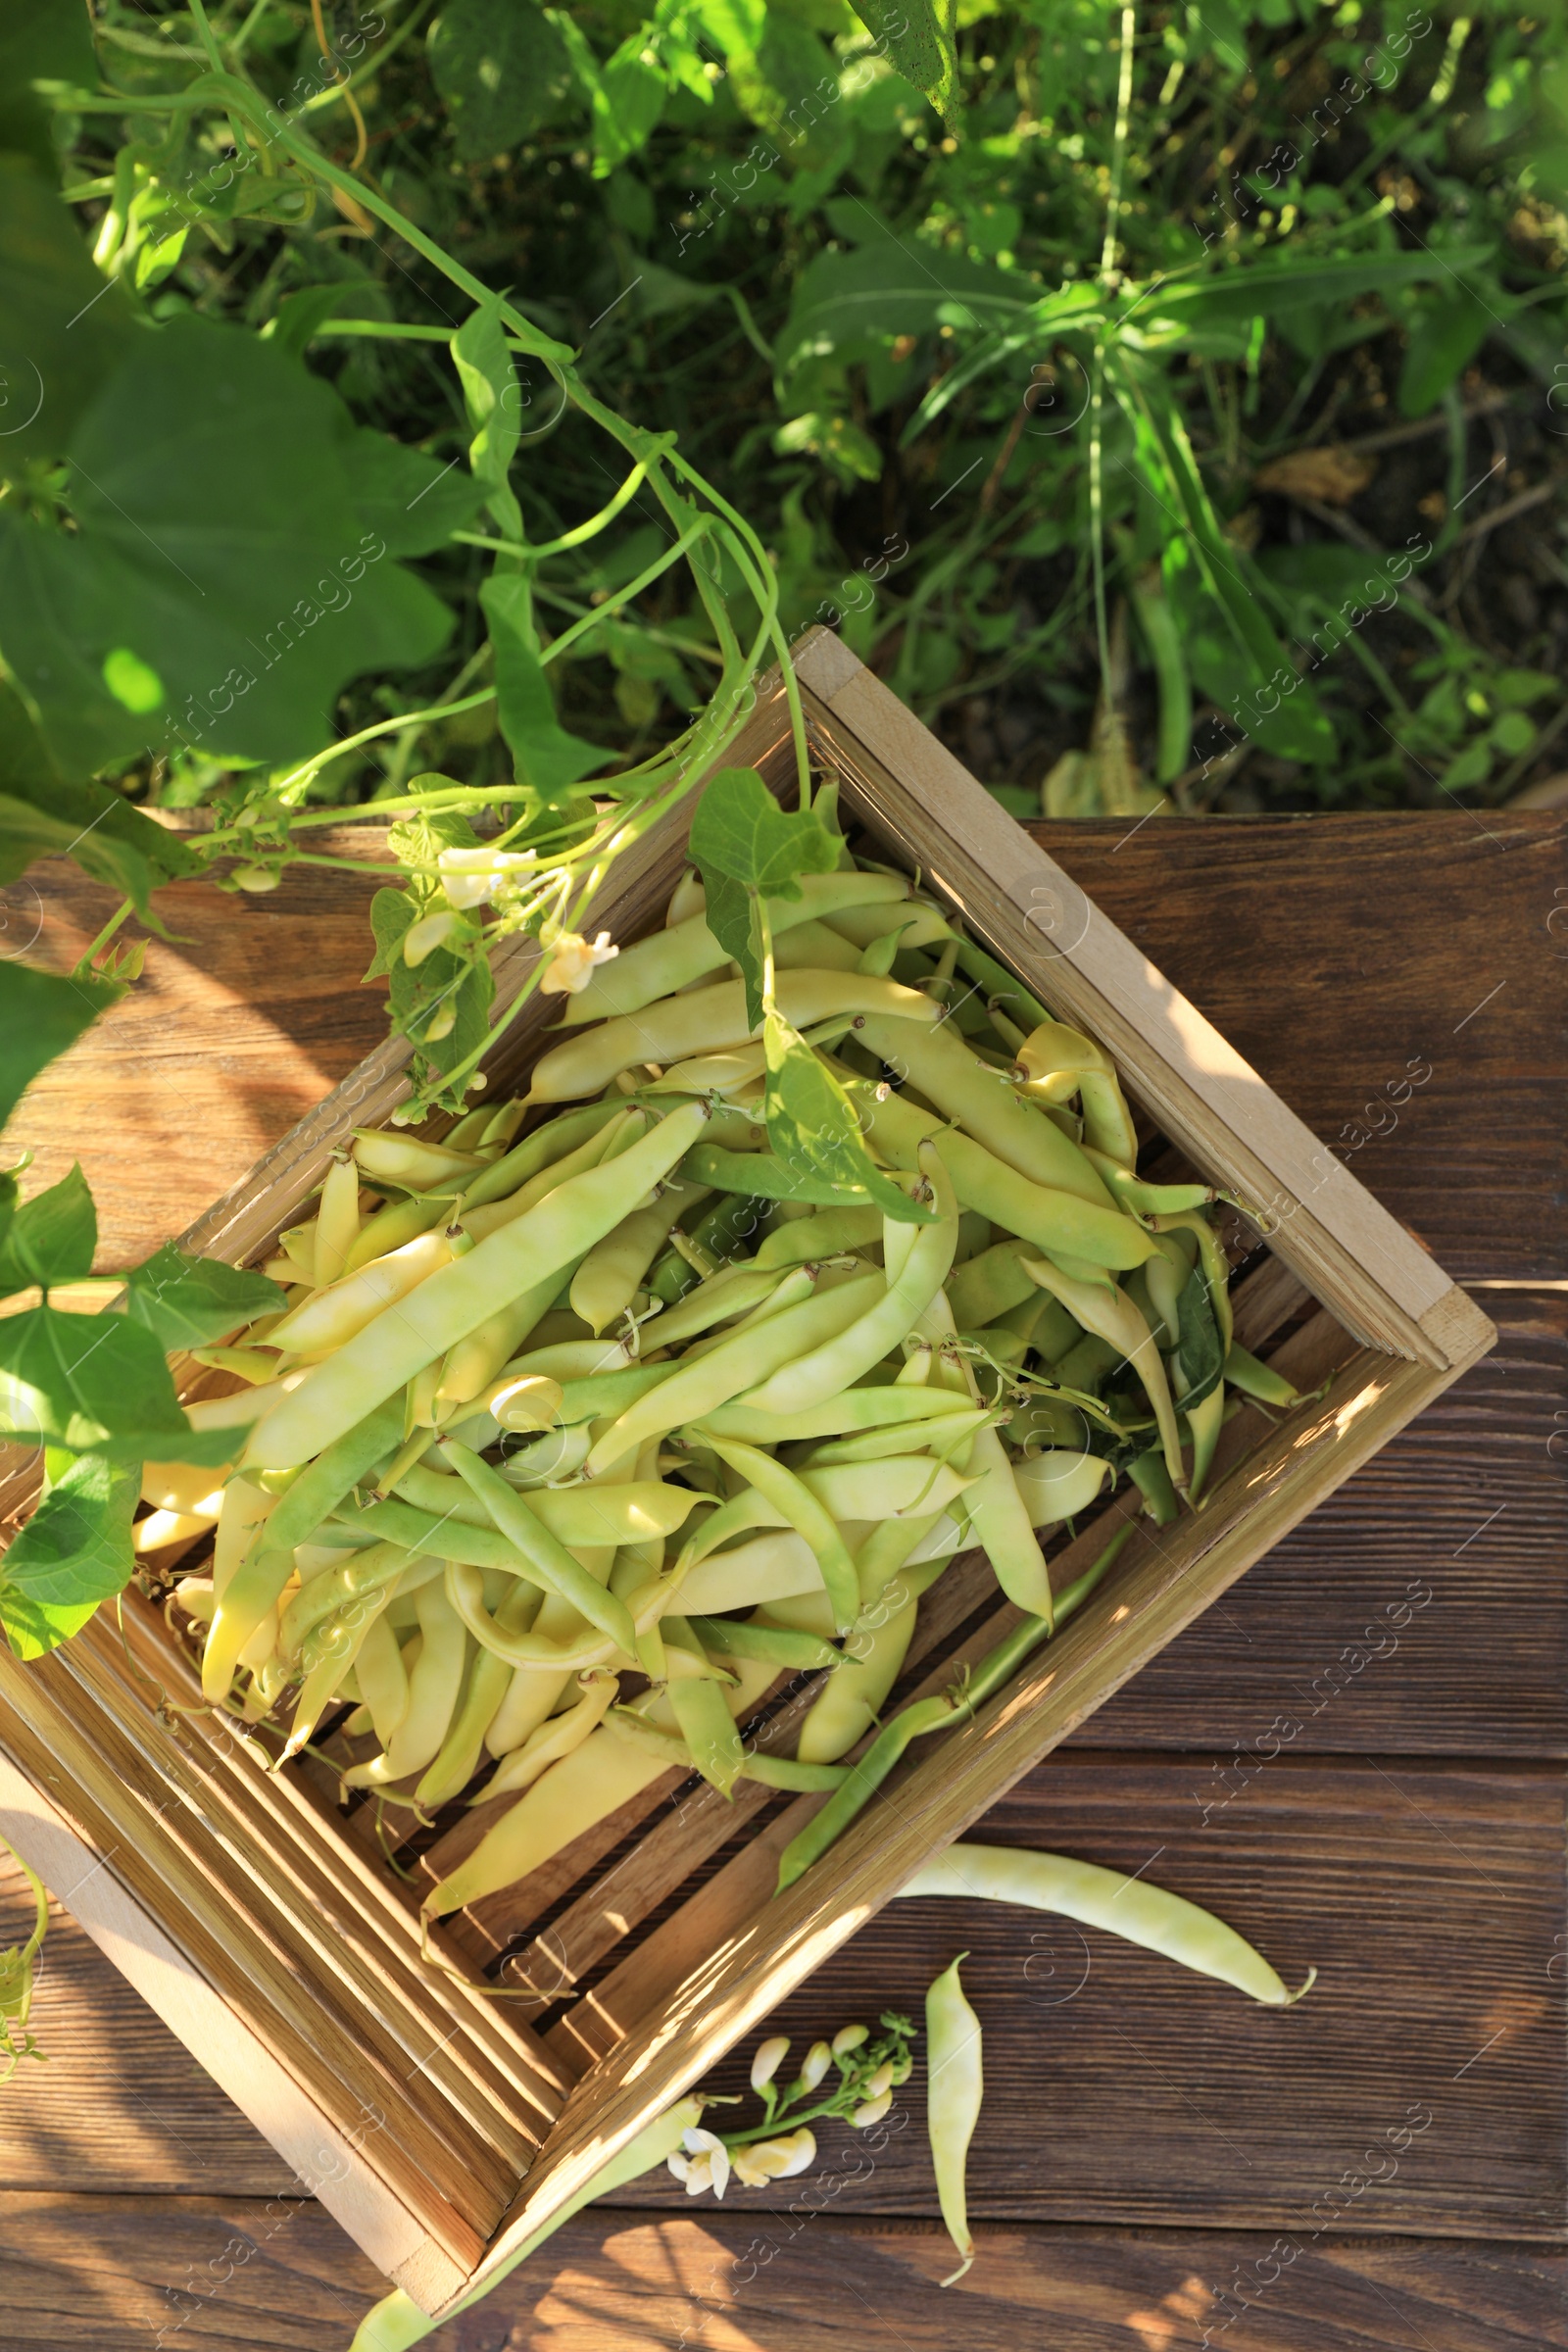 Photo of Crate with fresh green beans on wooden table in garden, top view